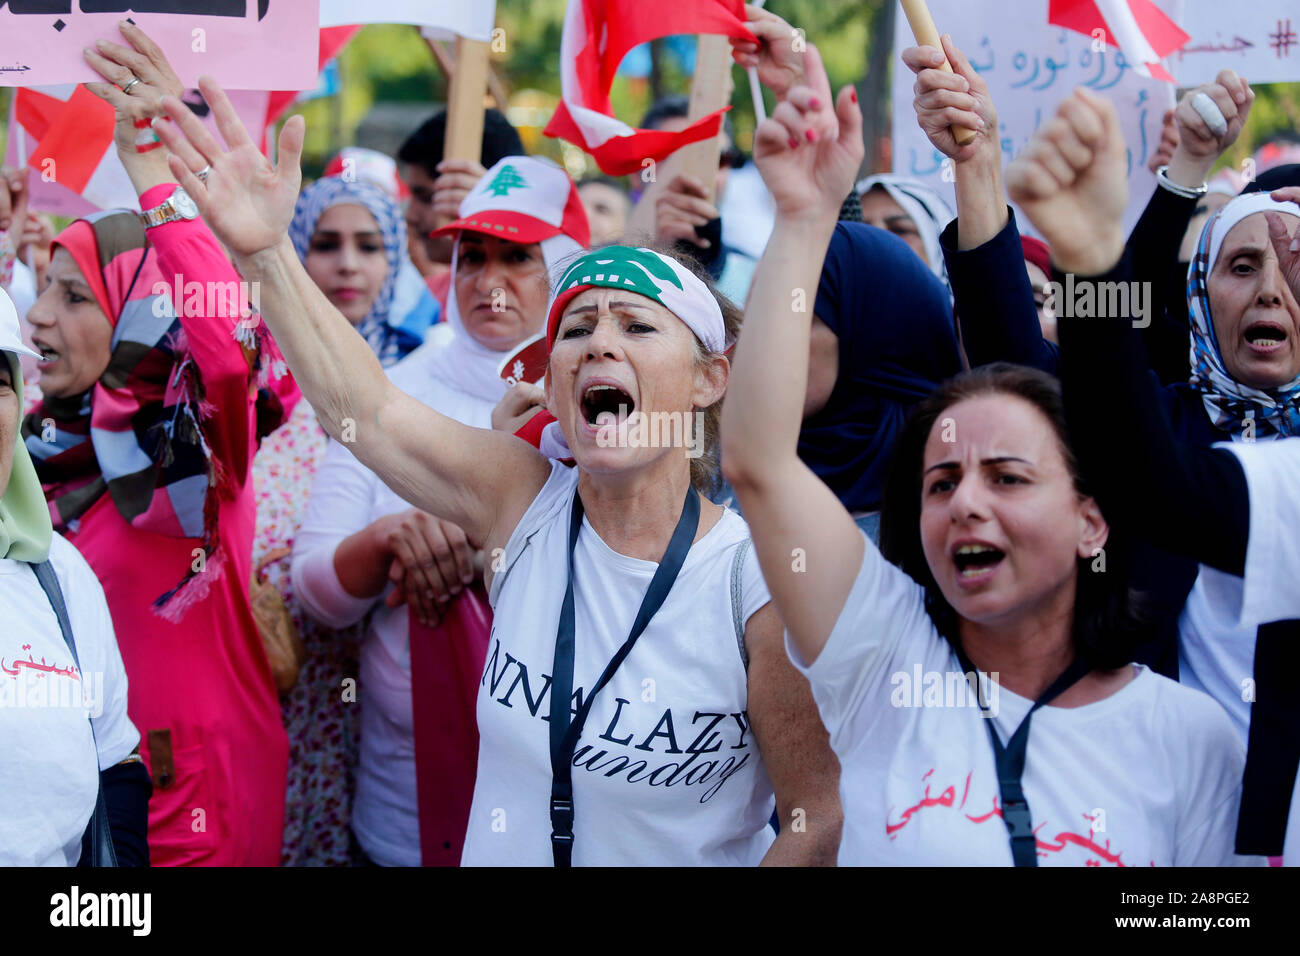 Beirut, Lebanon. 10th Nov, 2019. People take part in a protest against the government's policies in Beirut, Lebanon, on Nov. 10, 2019. Credit: Bilal Jawich/Xinhua/Alamy Live News Stock Photo